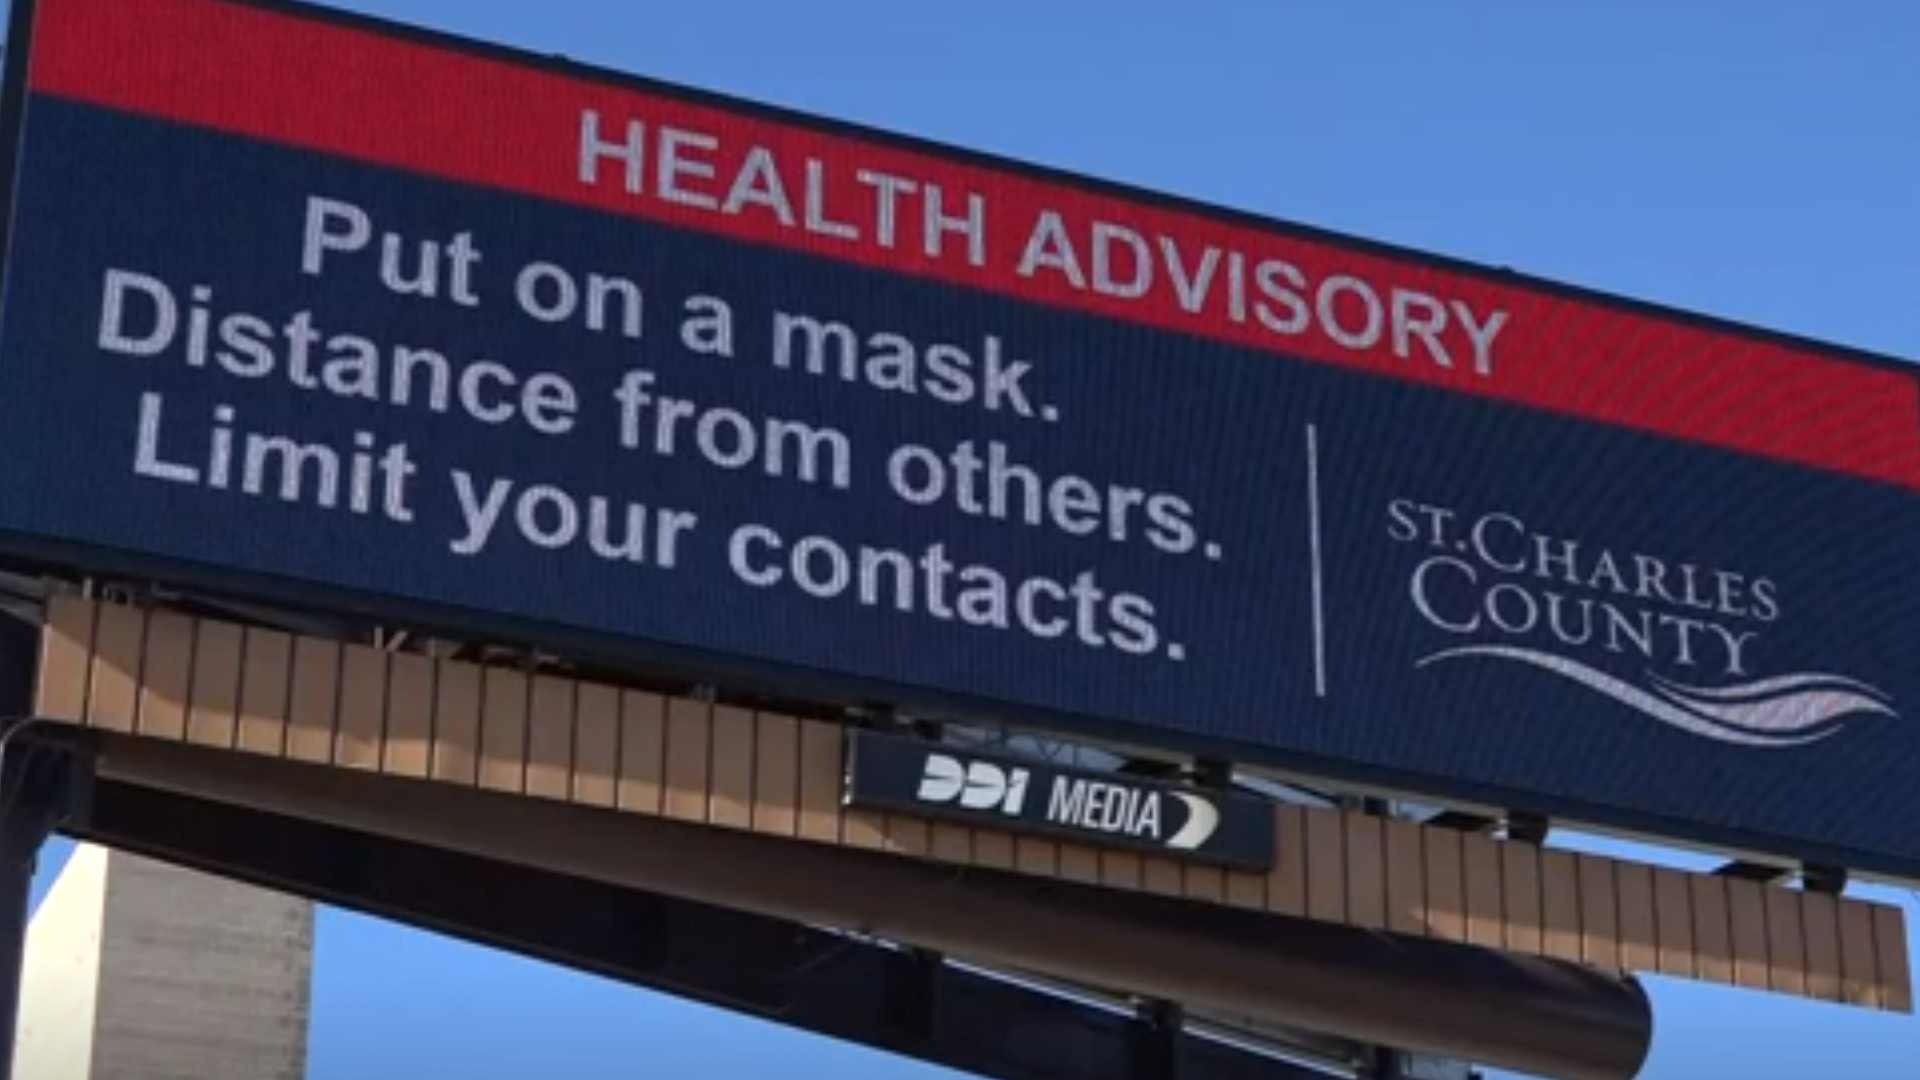 St. Charles County officials are launching a public awareness campaign with billboards